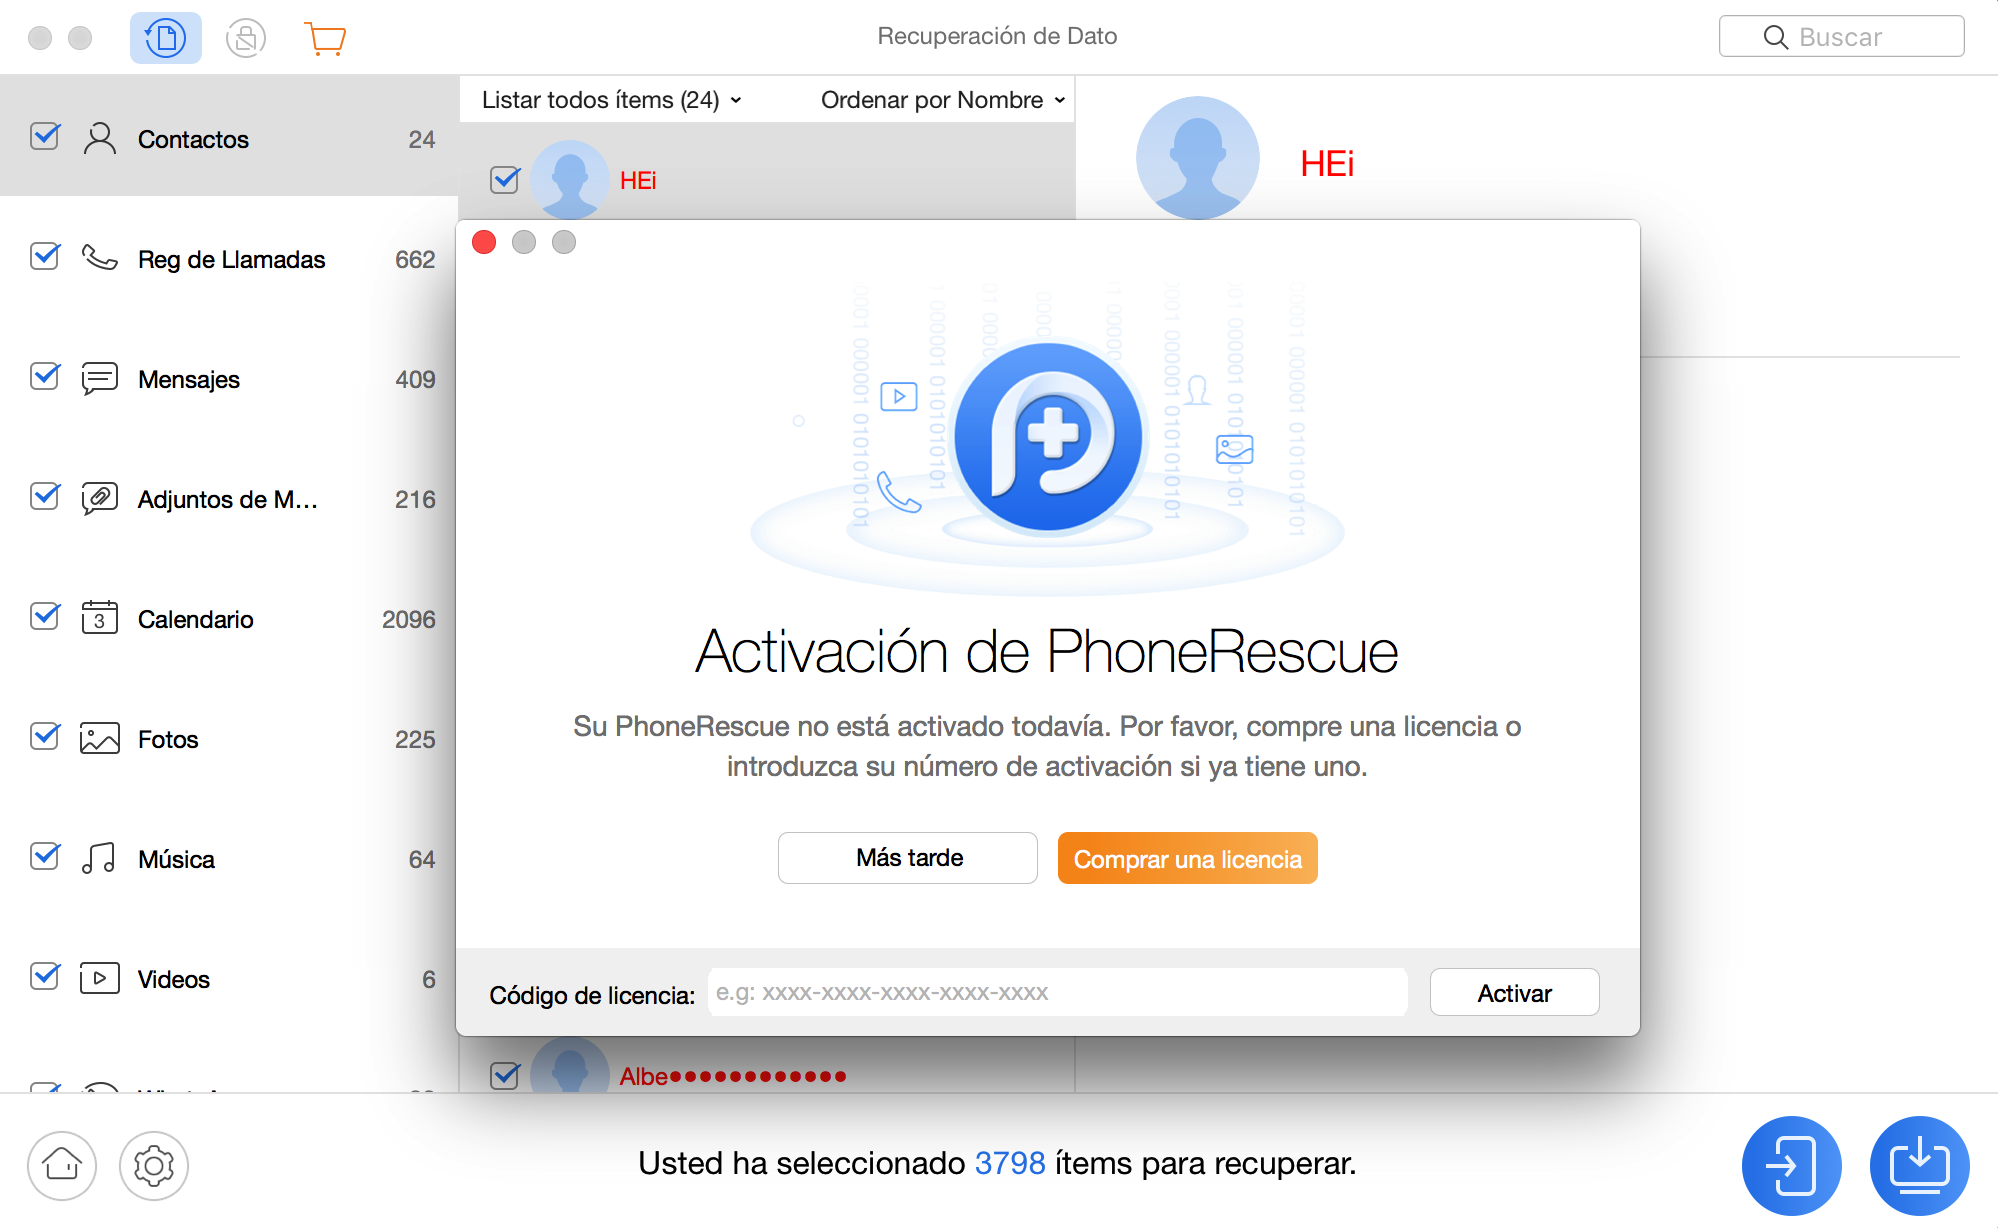 Activating PhoneRescue for SAMSUNG